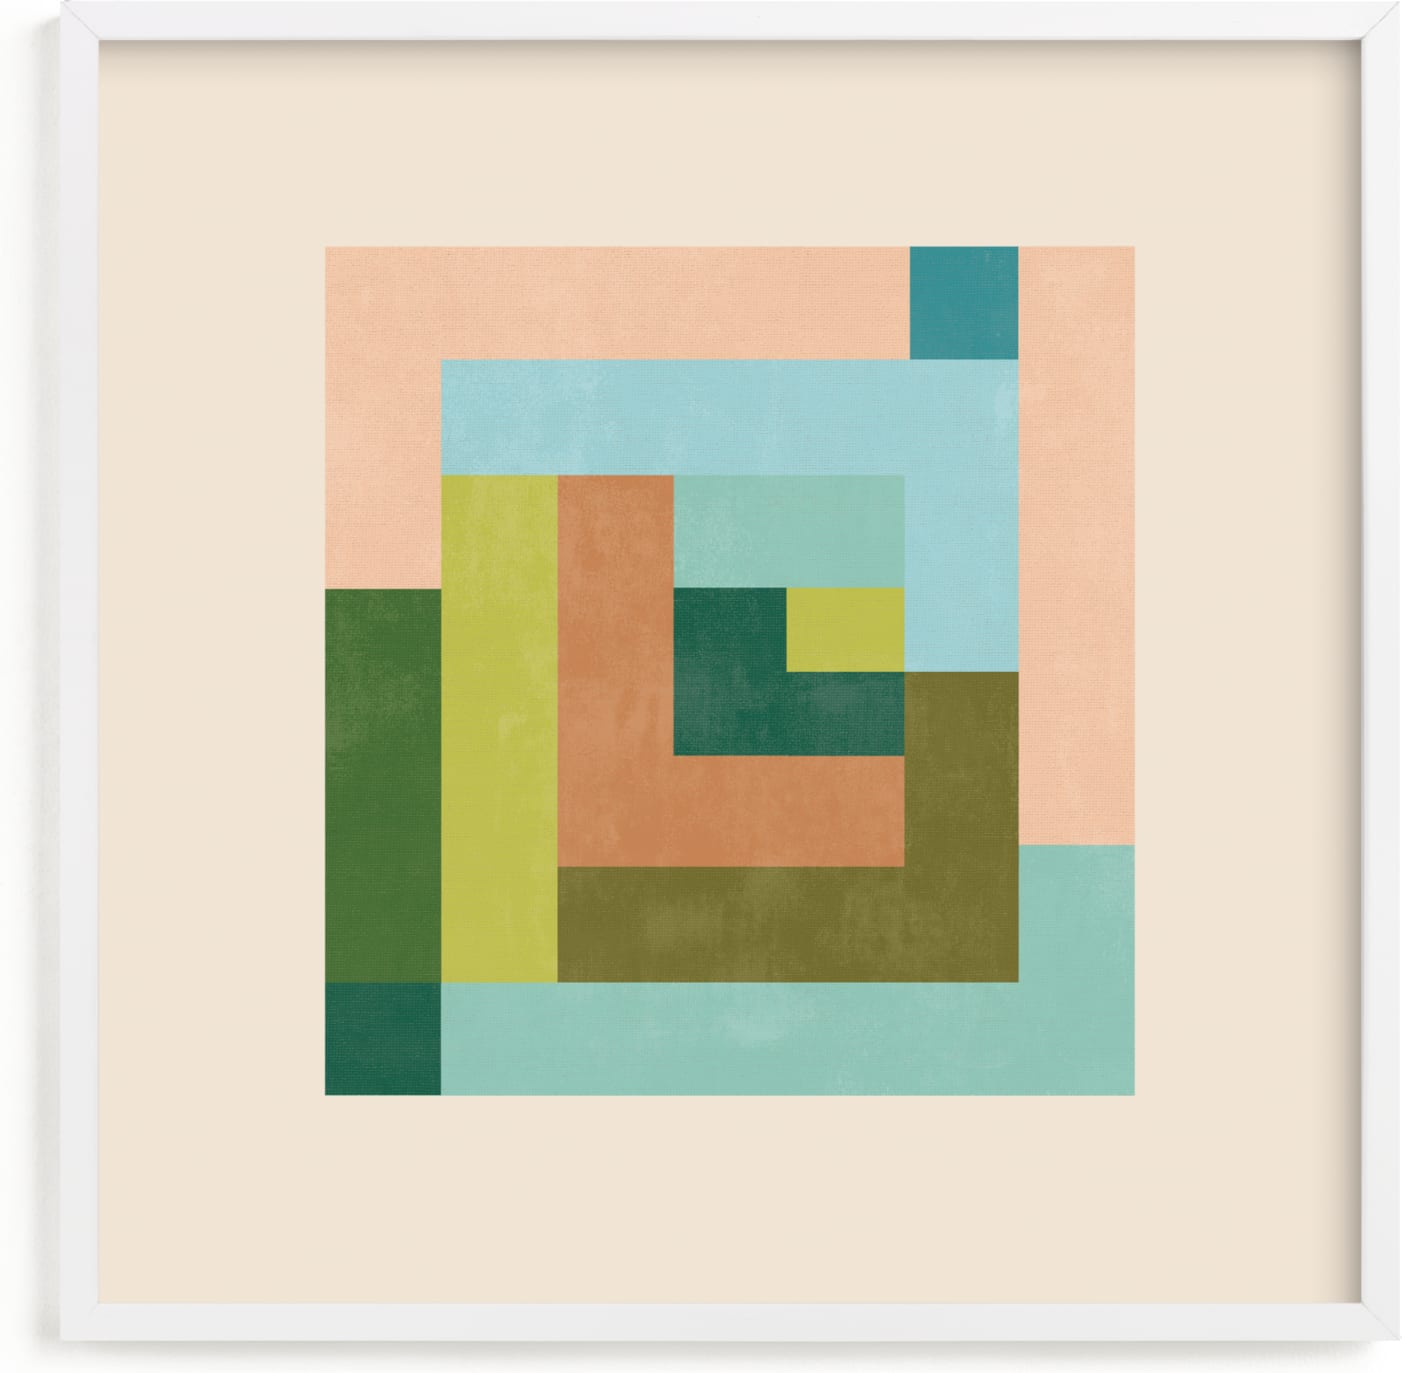 This is a blue, pink, green art by Creo Study called Pixel Plush I.